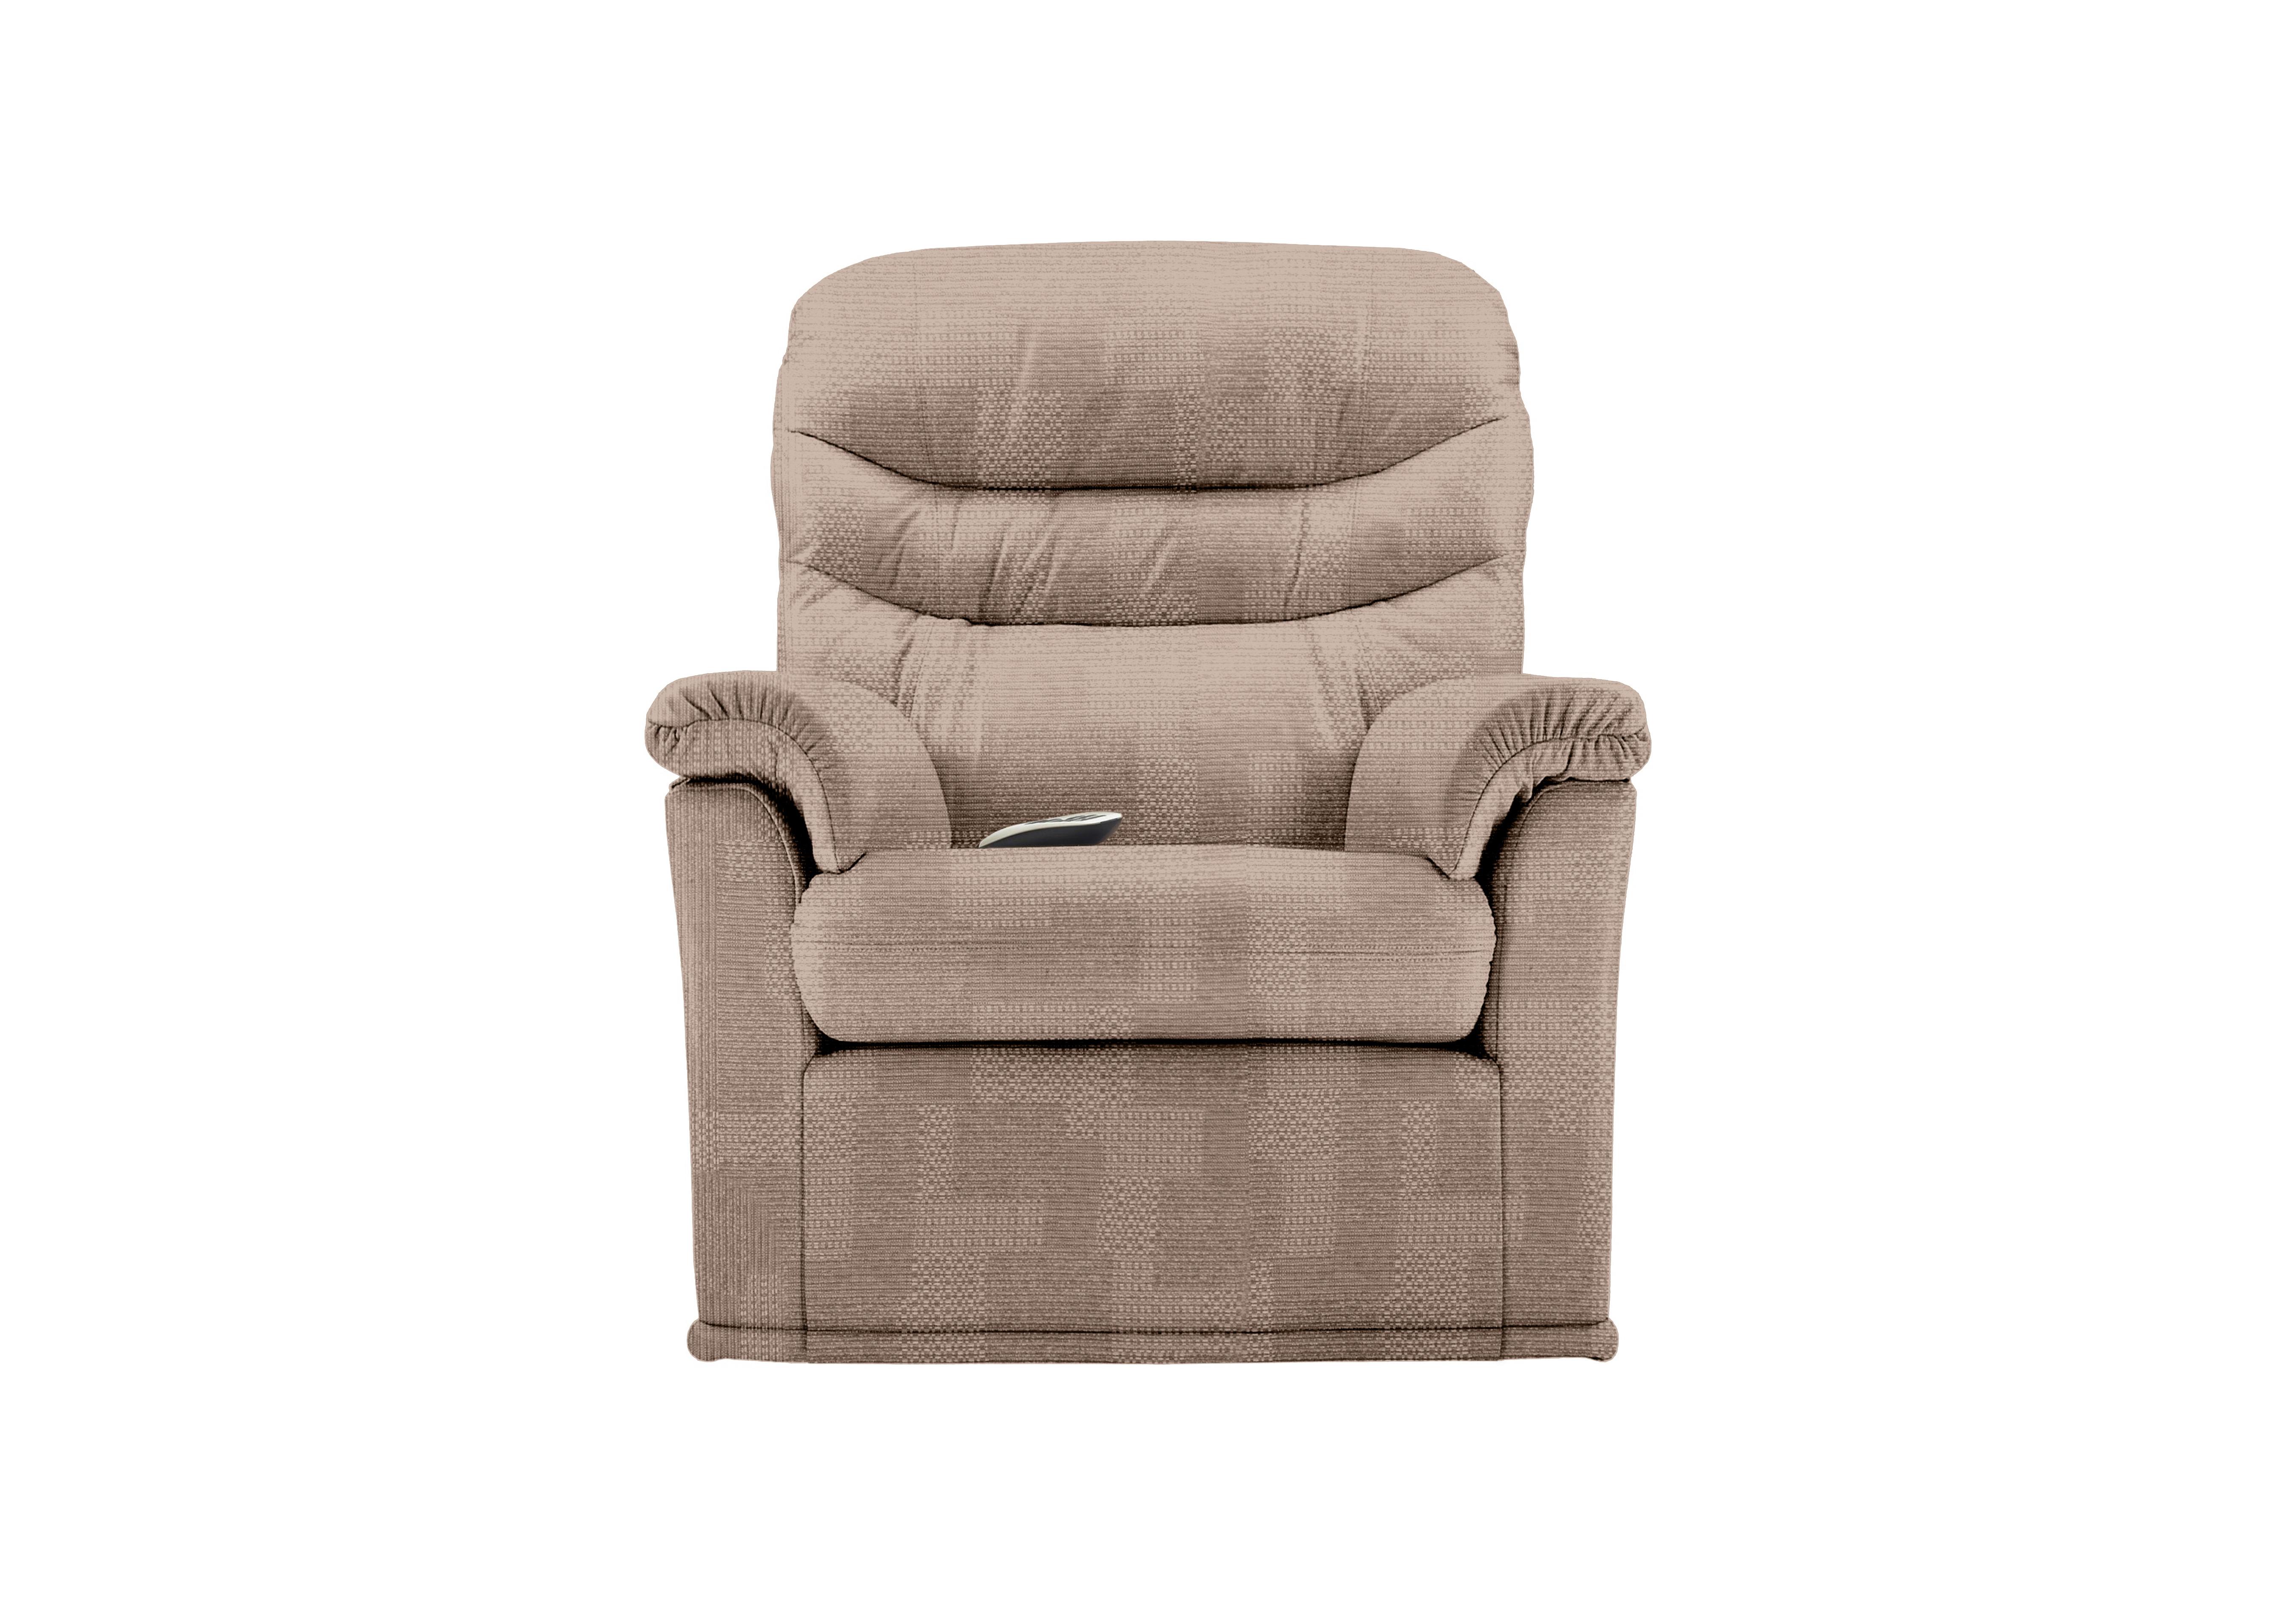 Malvern Fabric Rise and Recline Armchair in A800 Faro Sand on Furniture Village